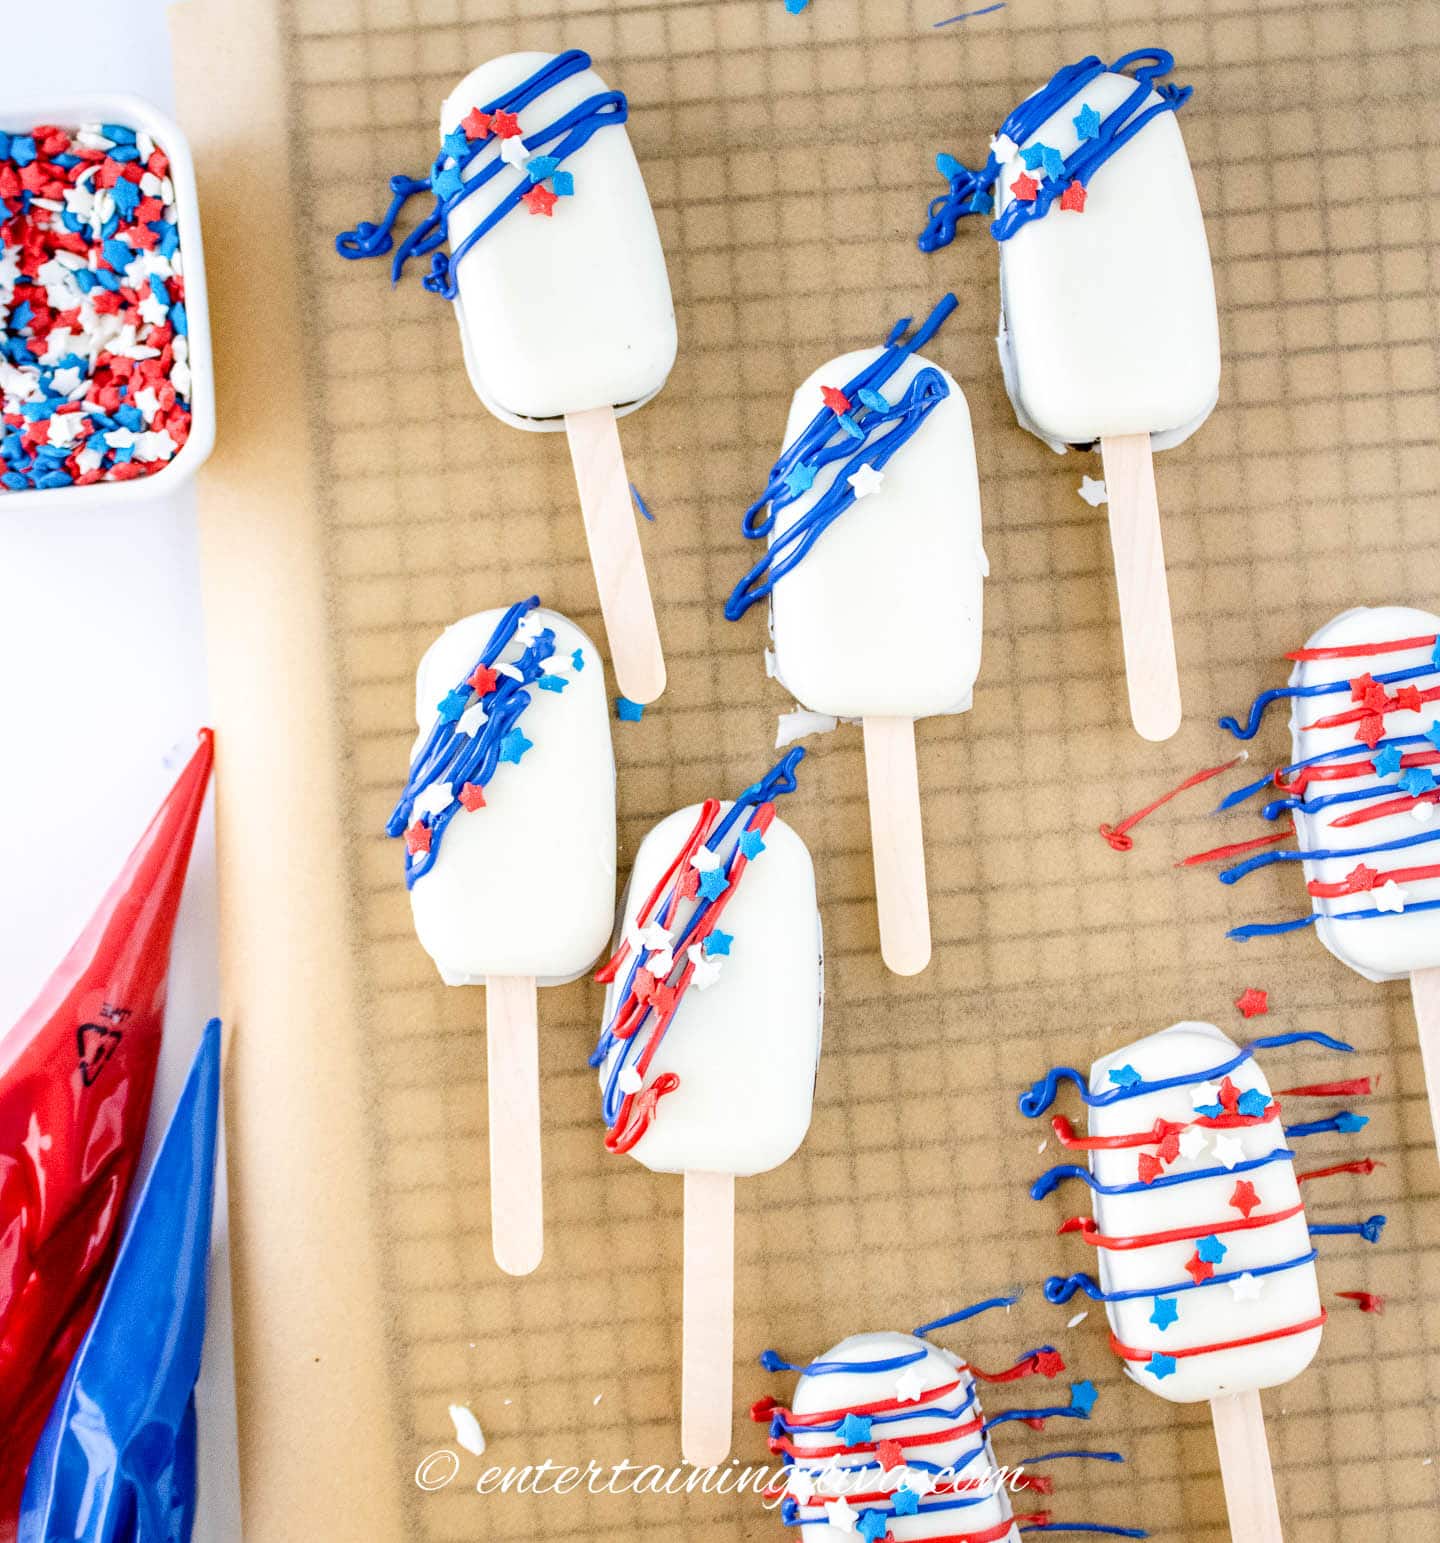 White cakesicles decorated with red and blue icing and star sprinkles